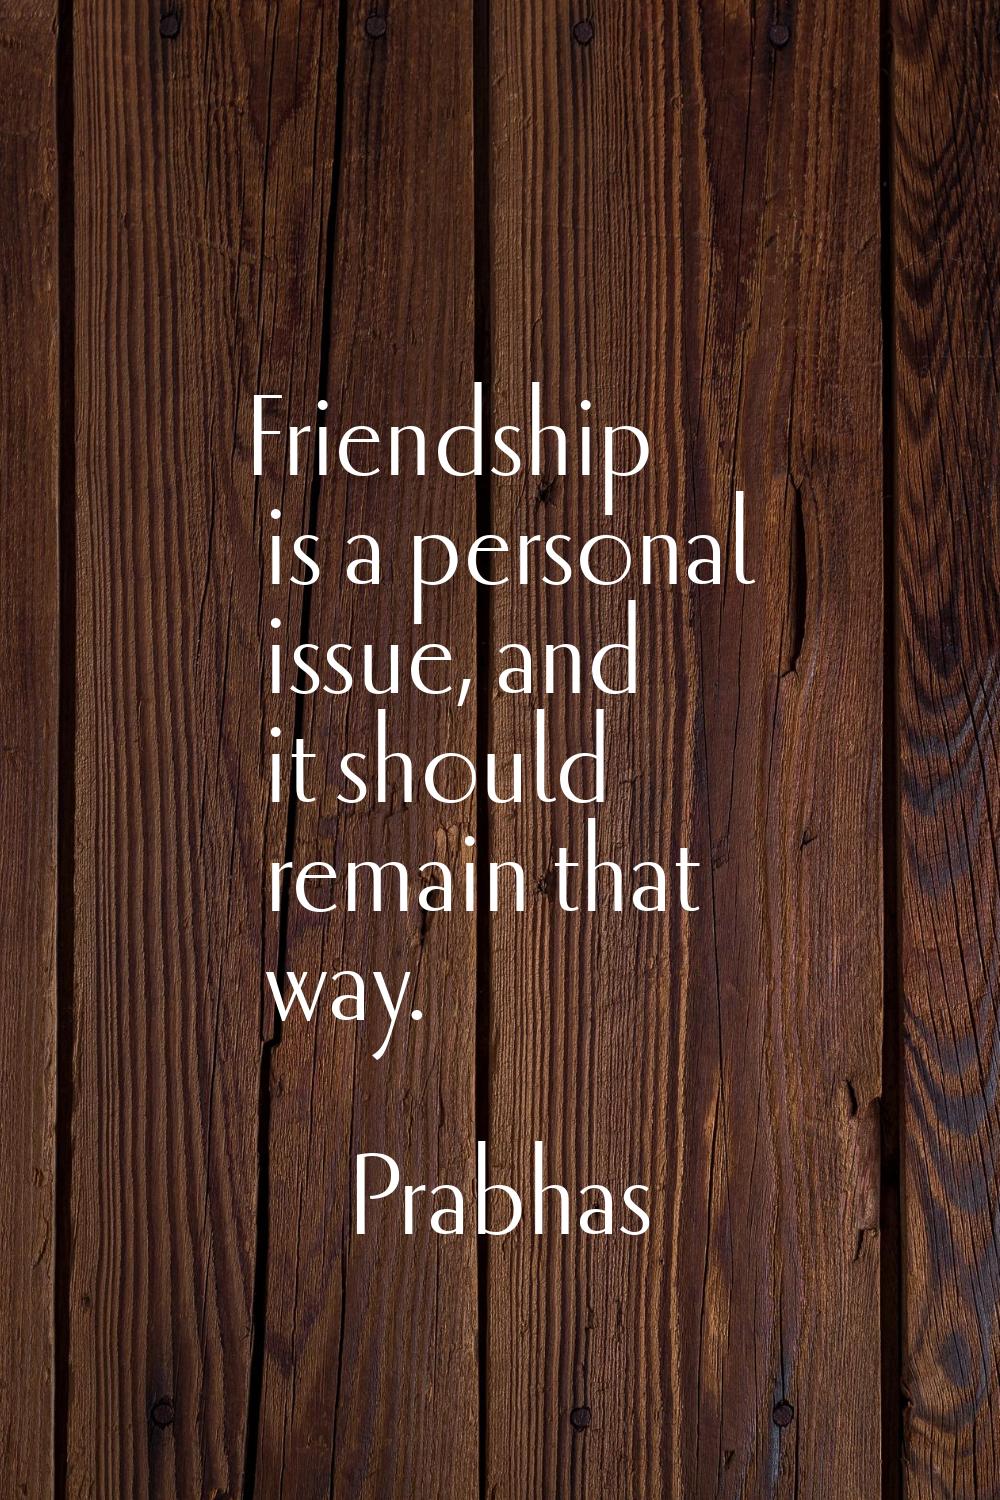 Friendship is a personal issue, and it should remain that way.